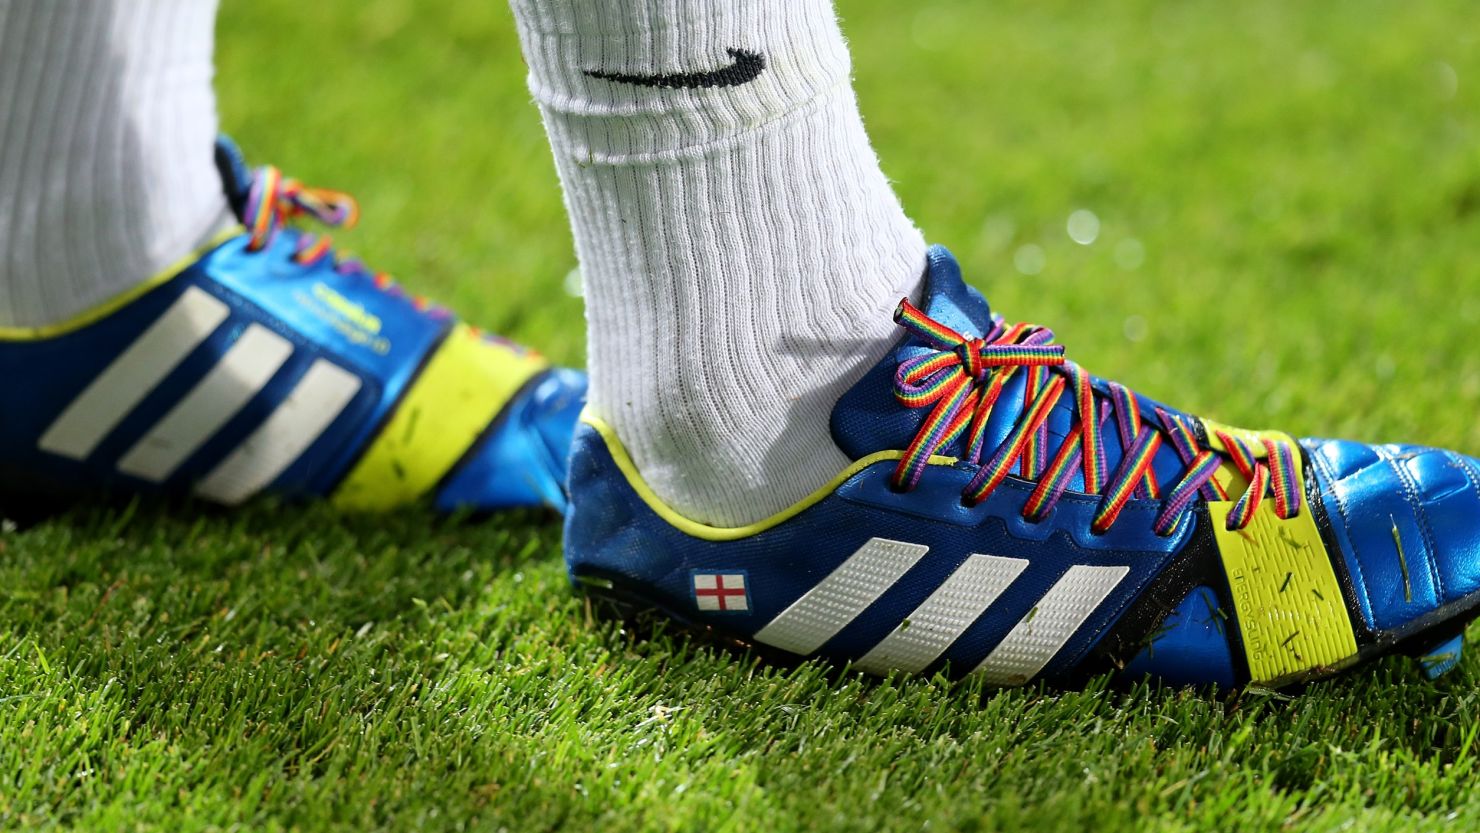 Queens Park Rangers midfielder Joey Barton was the first player to wear the rainbow laces.